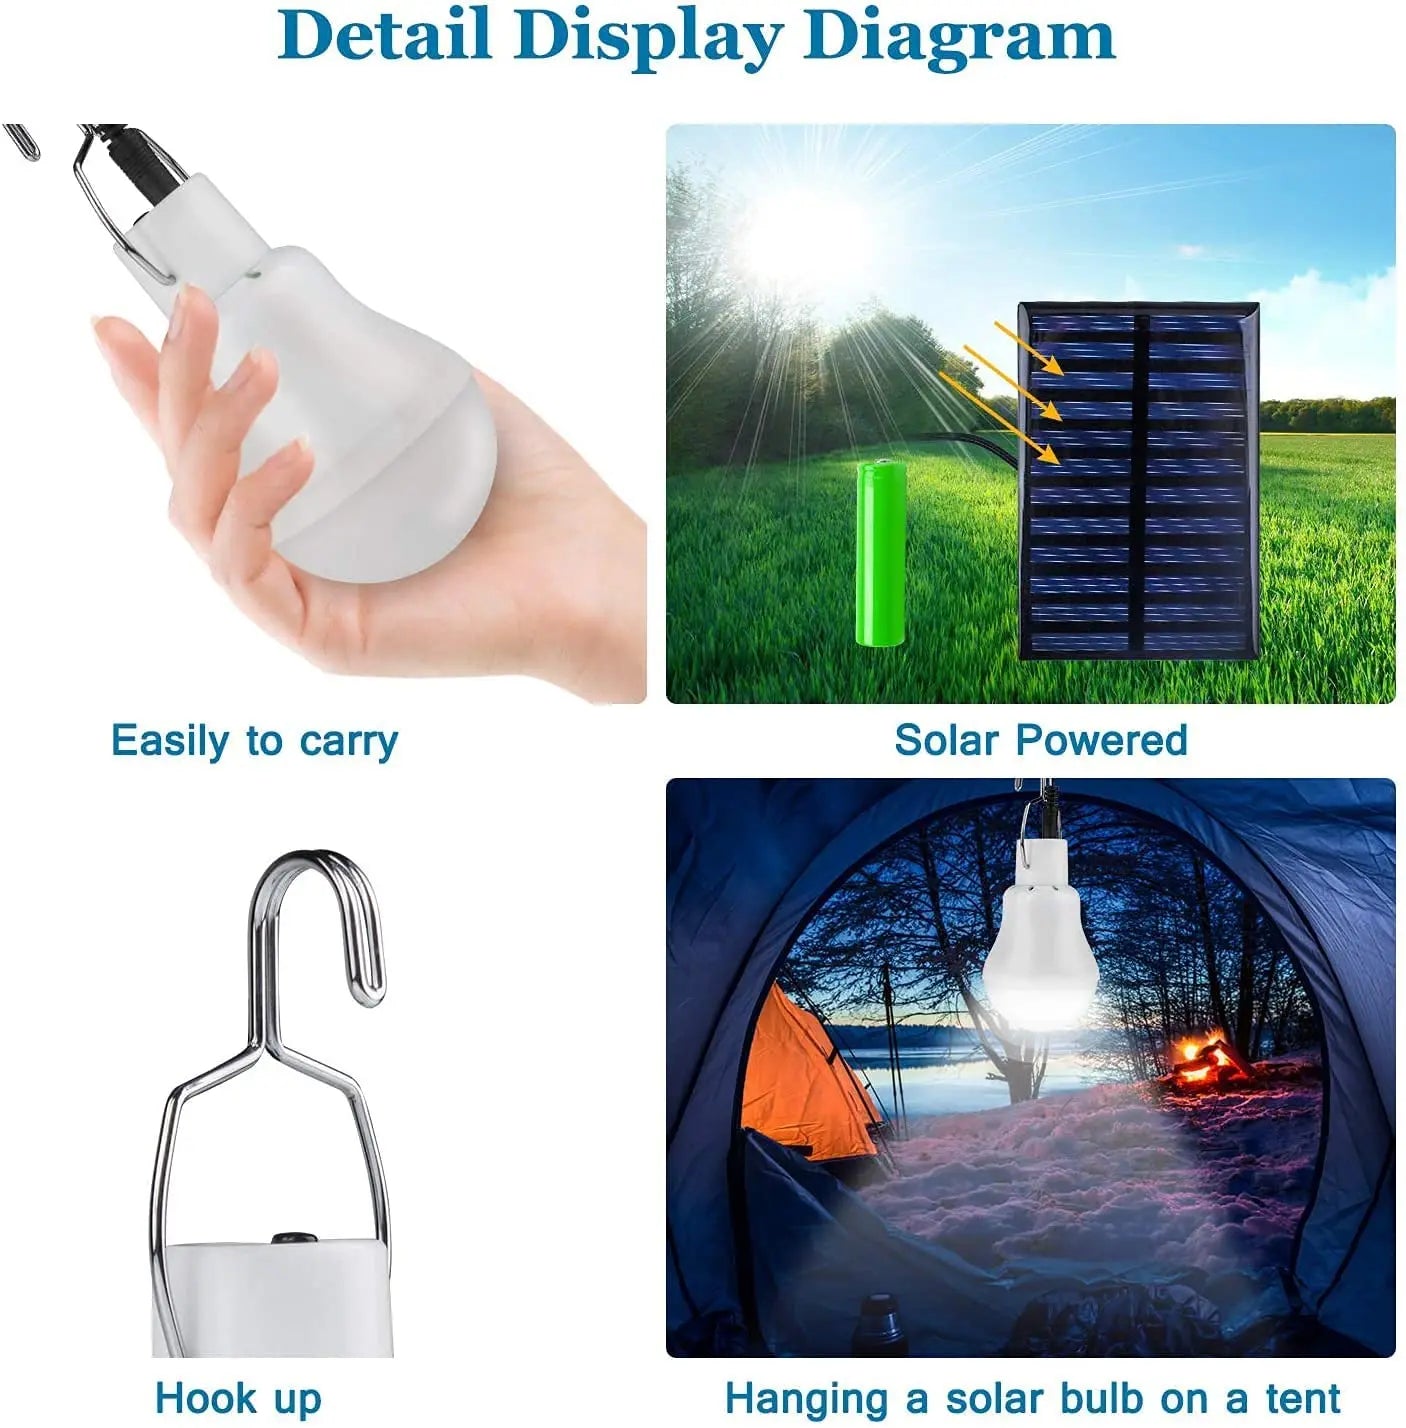 LED Solar Bulb Light, Compact solar-powered lantern for camping and indoor use with easy carry design.